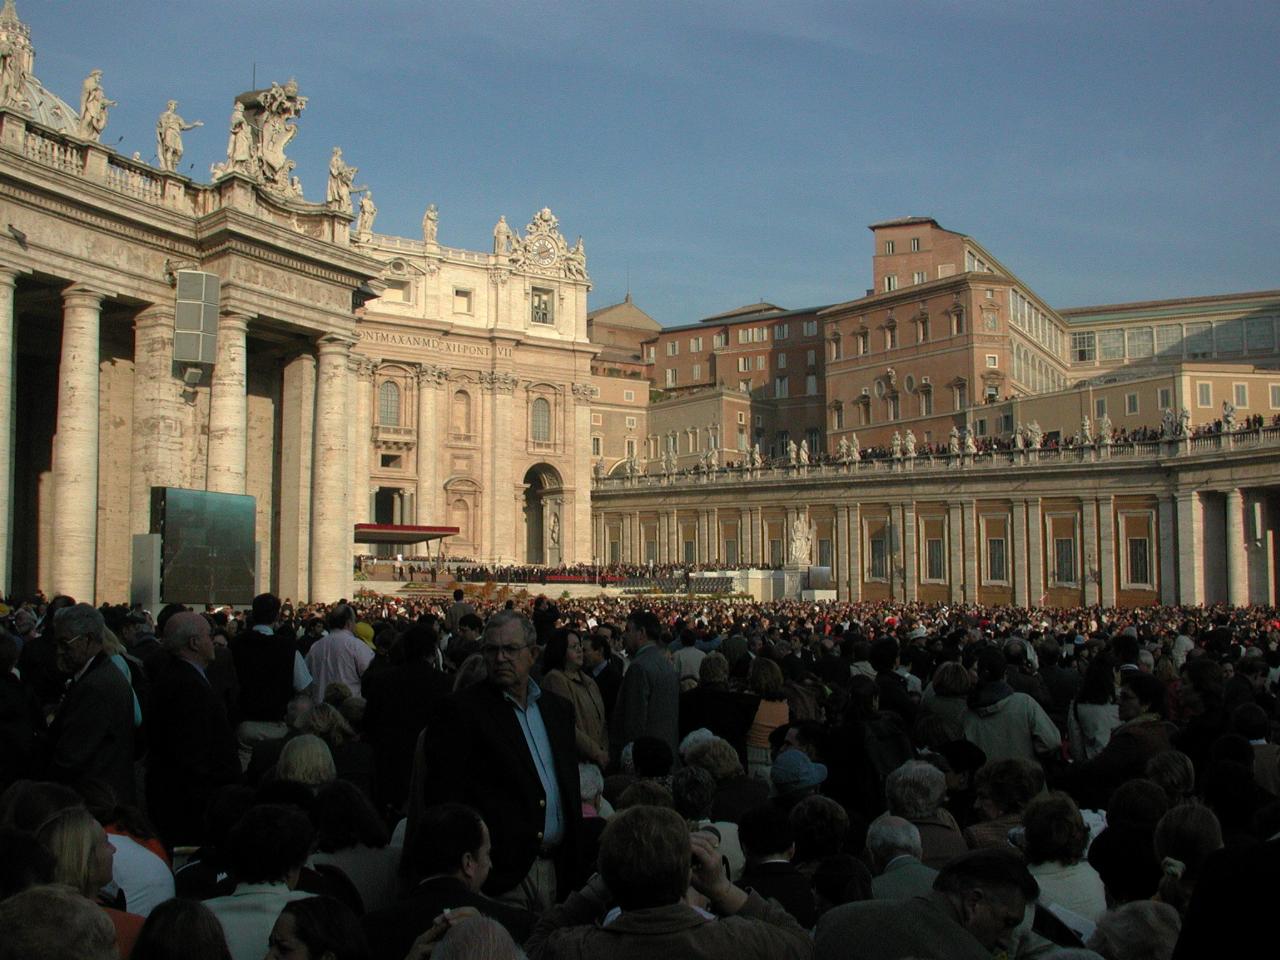 Later in Saint Peter's Piazza for canonisation